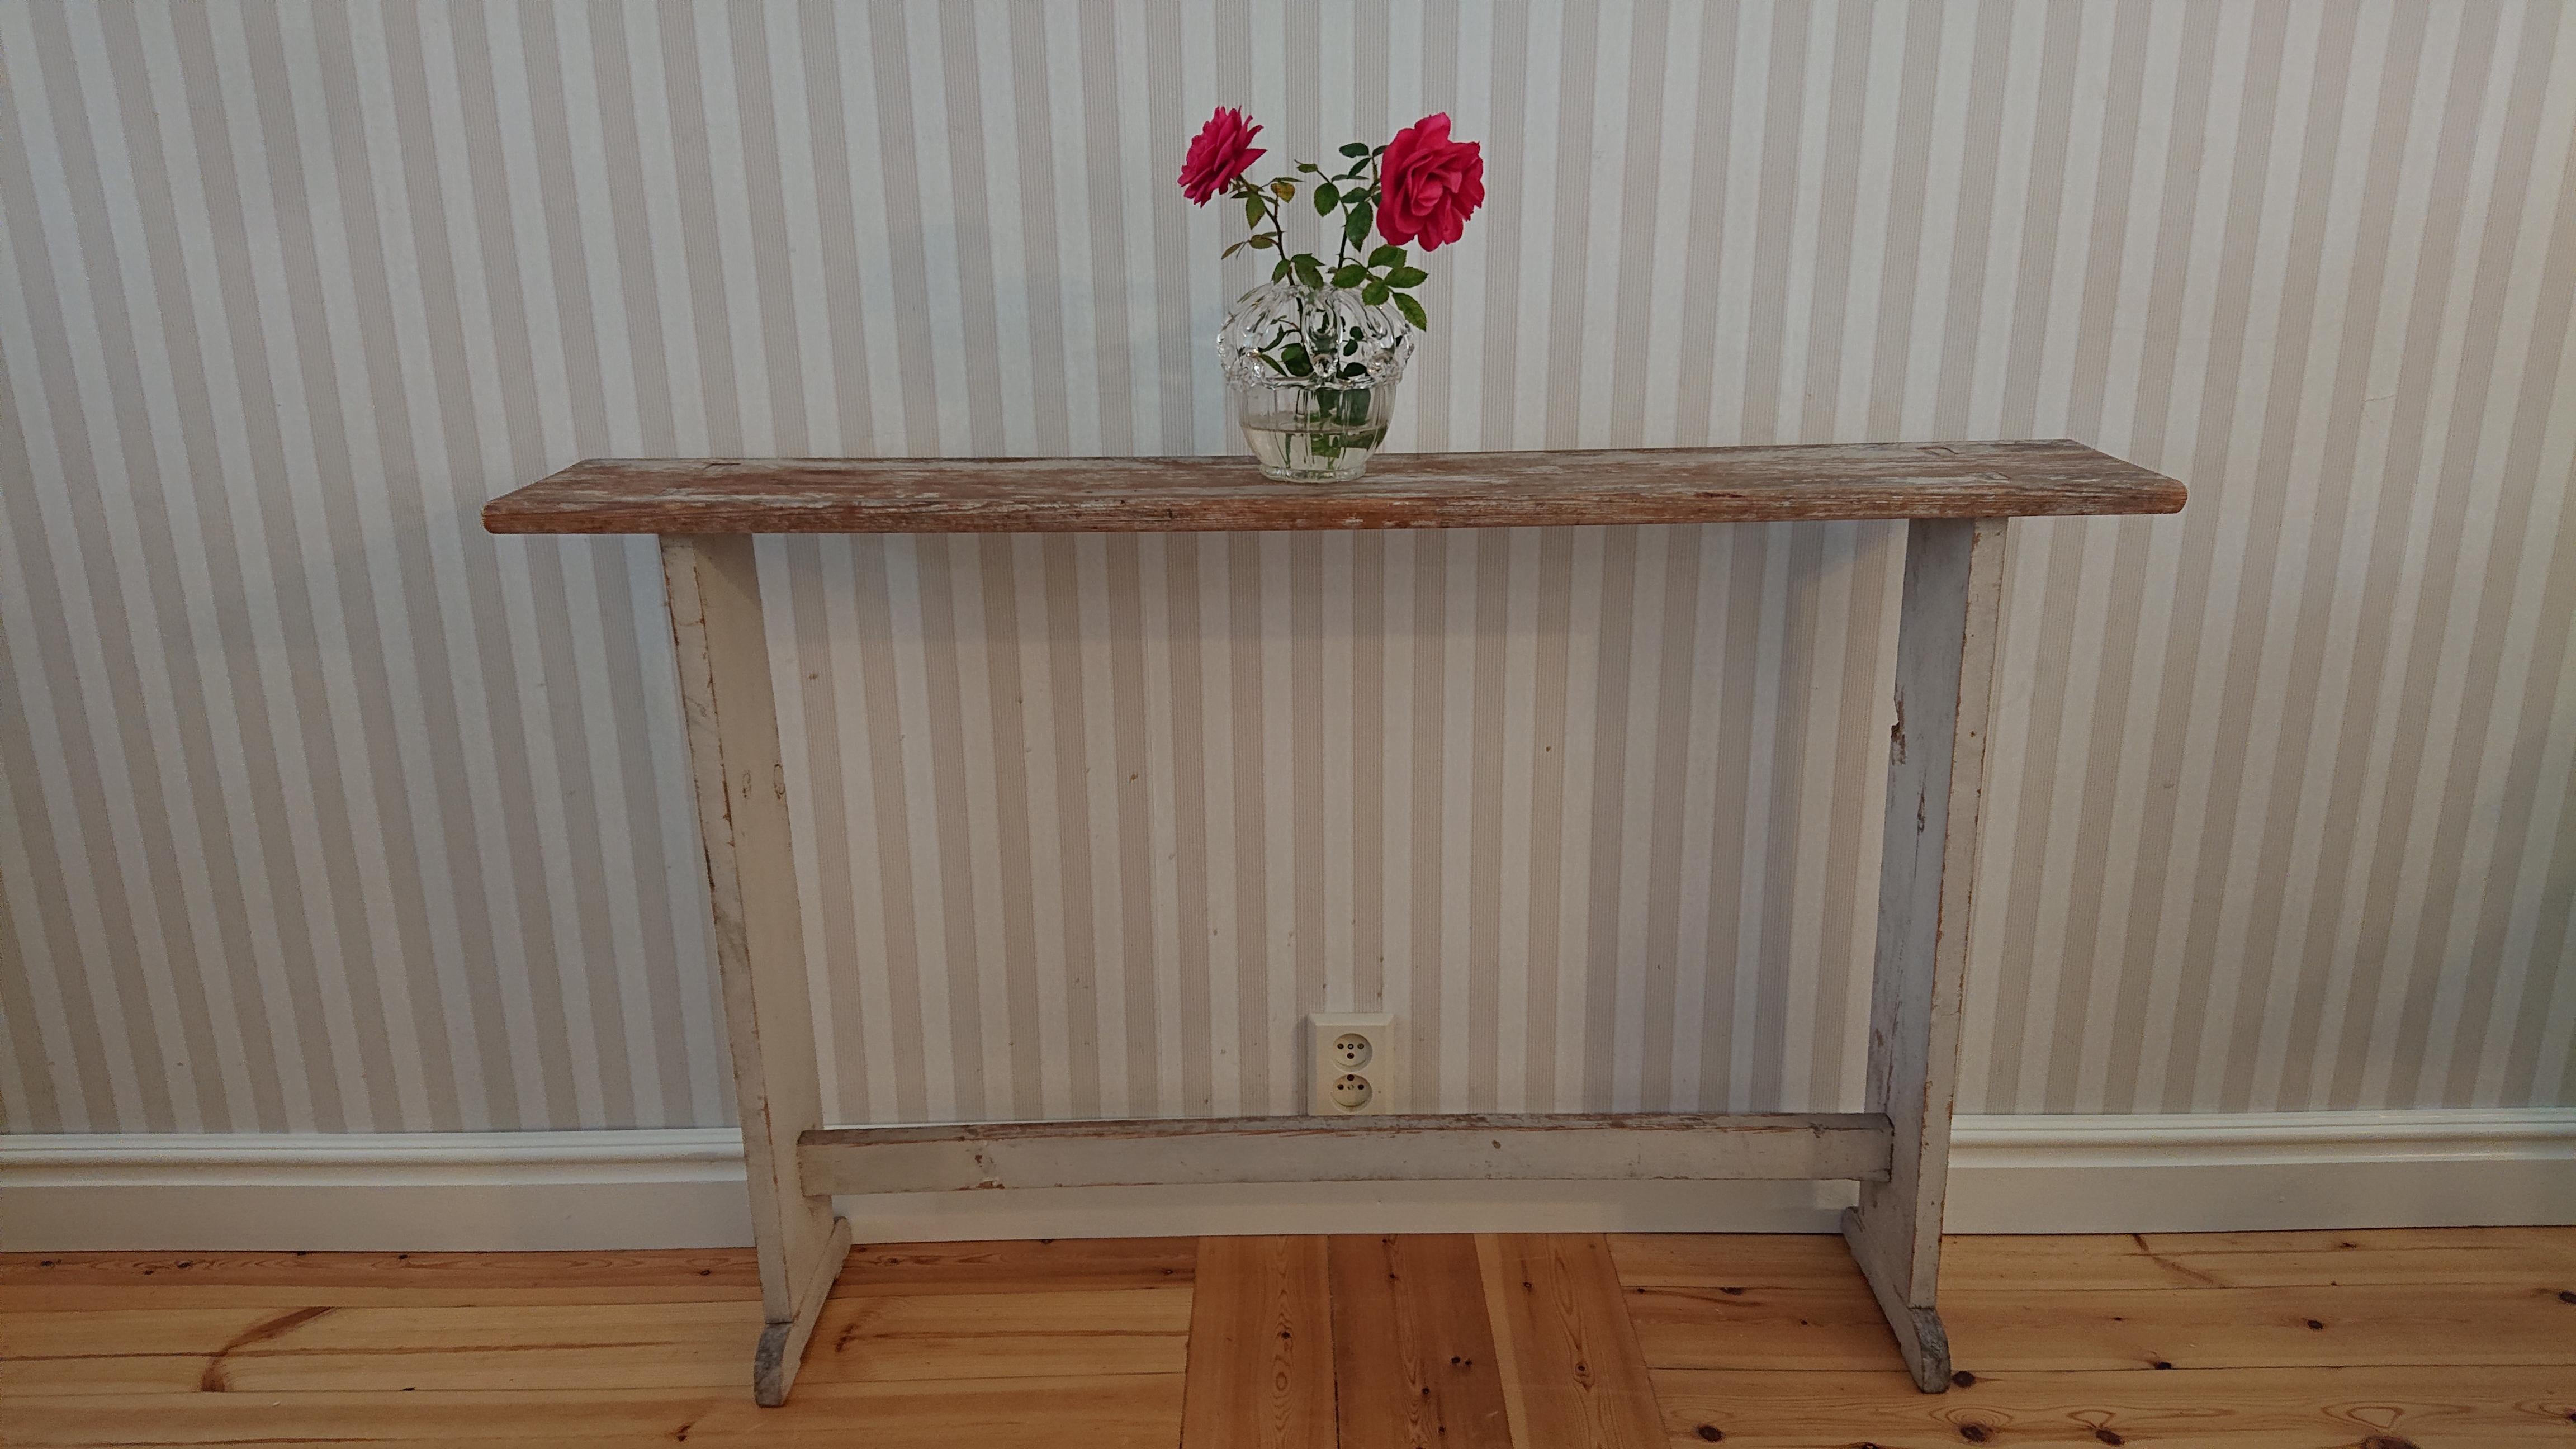 19th century Swedish flower table from Skelleftea Vasterbotten, Northern Sweden.
Untouched originalpaint. 
Small wood damage on one foot. 
Made in painted pine.
   